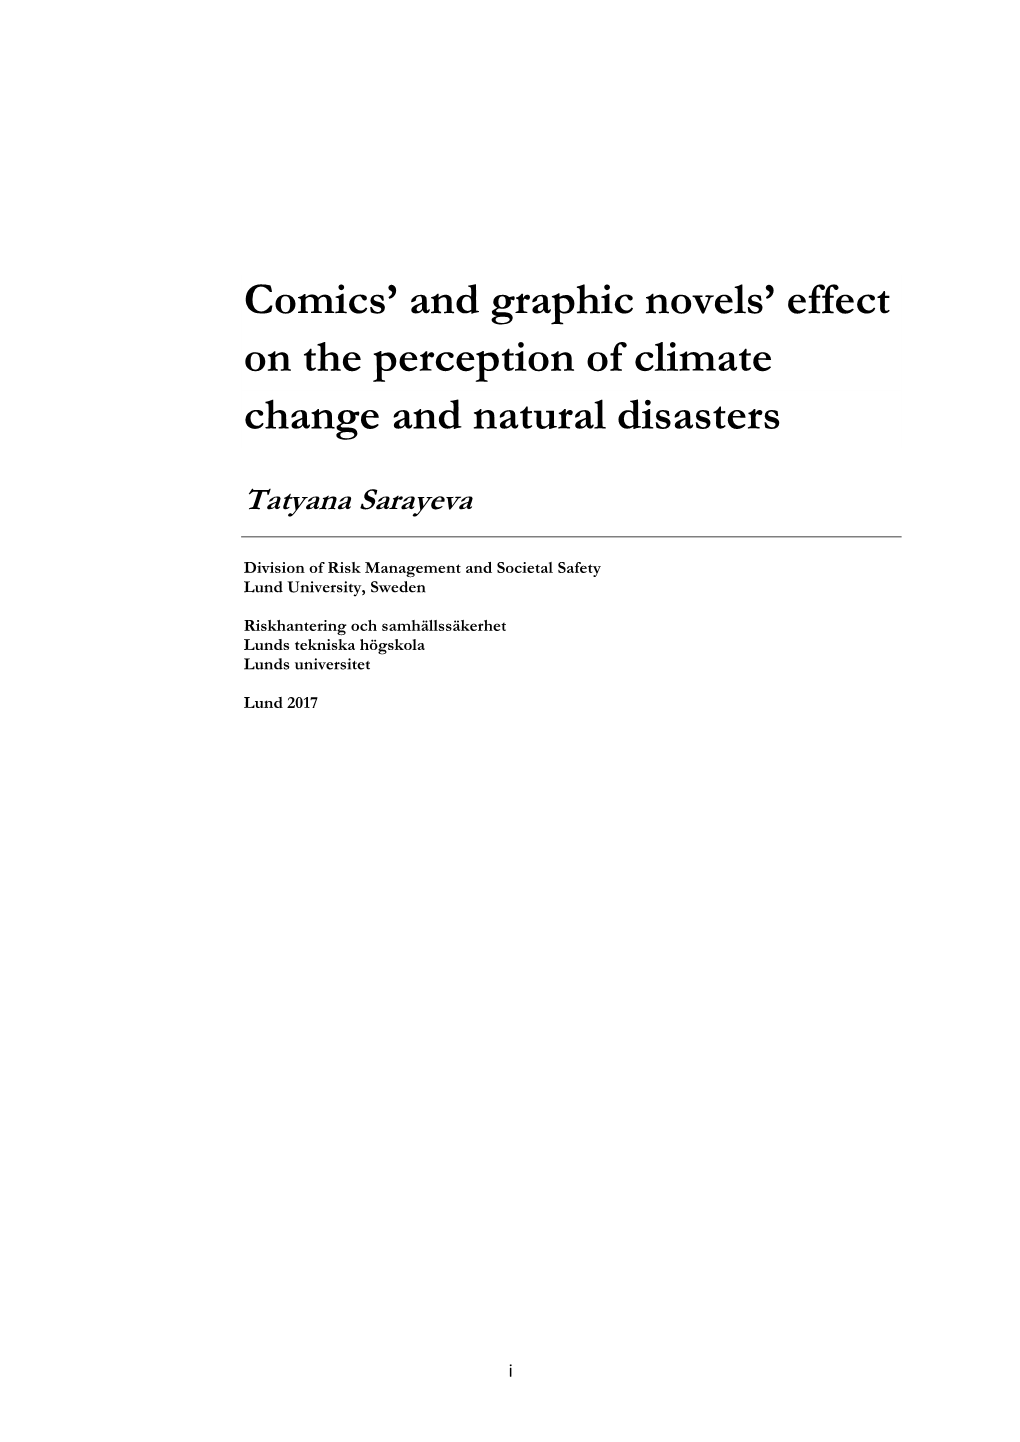 Comics' and Graphic Novels' Effect on the Perception of Climate Change and Natural Disasters